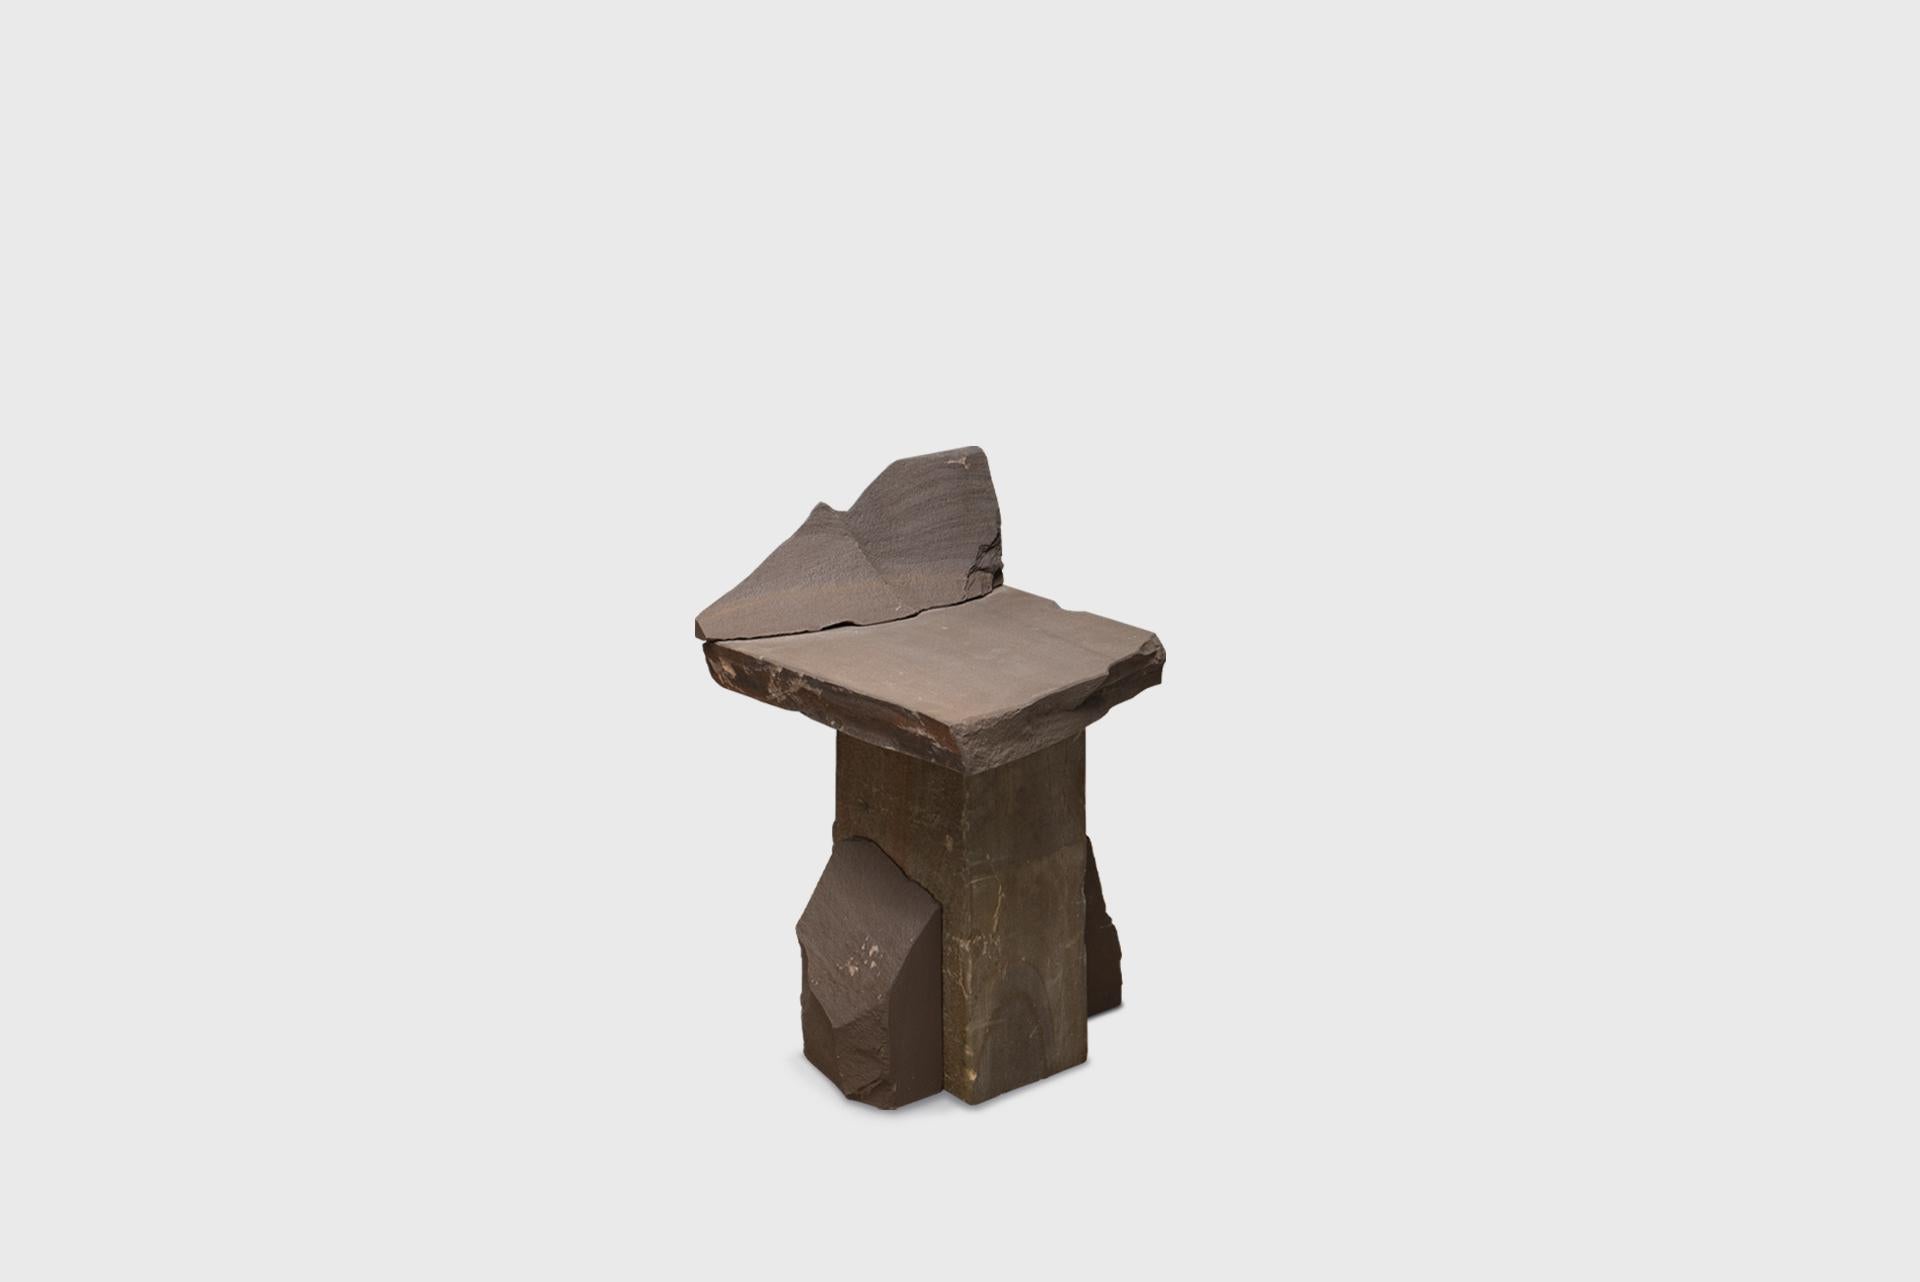 Contemporary Natural Chair 14, Graywacke Offcut Gray Stone, Carsten in der Elst For Sale 6